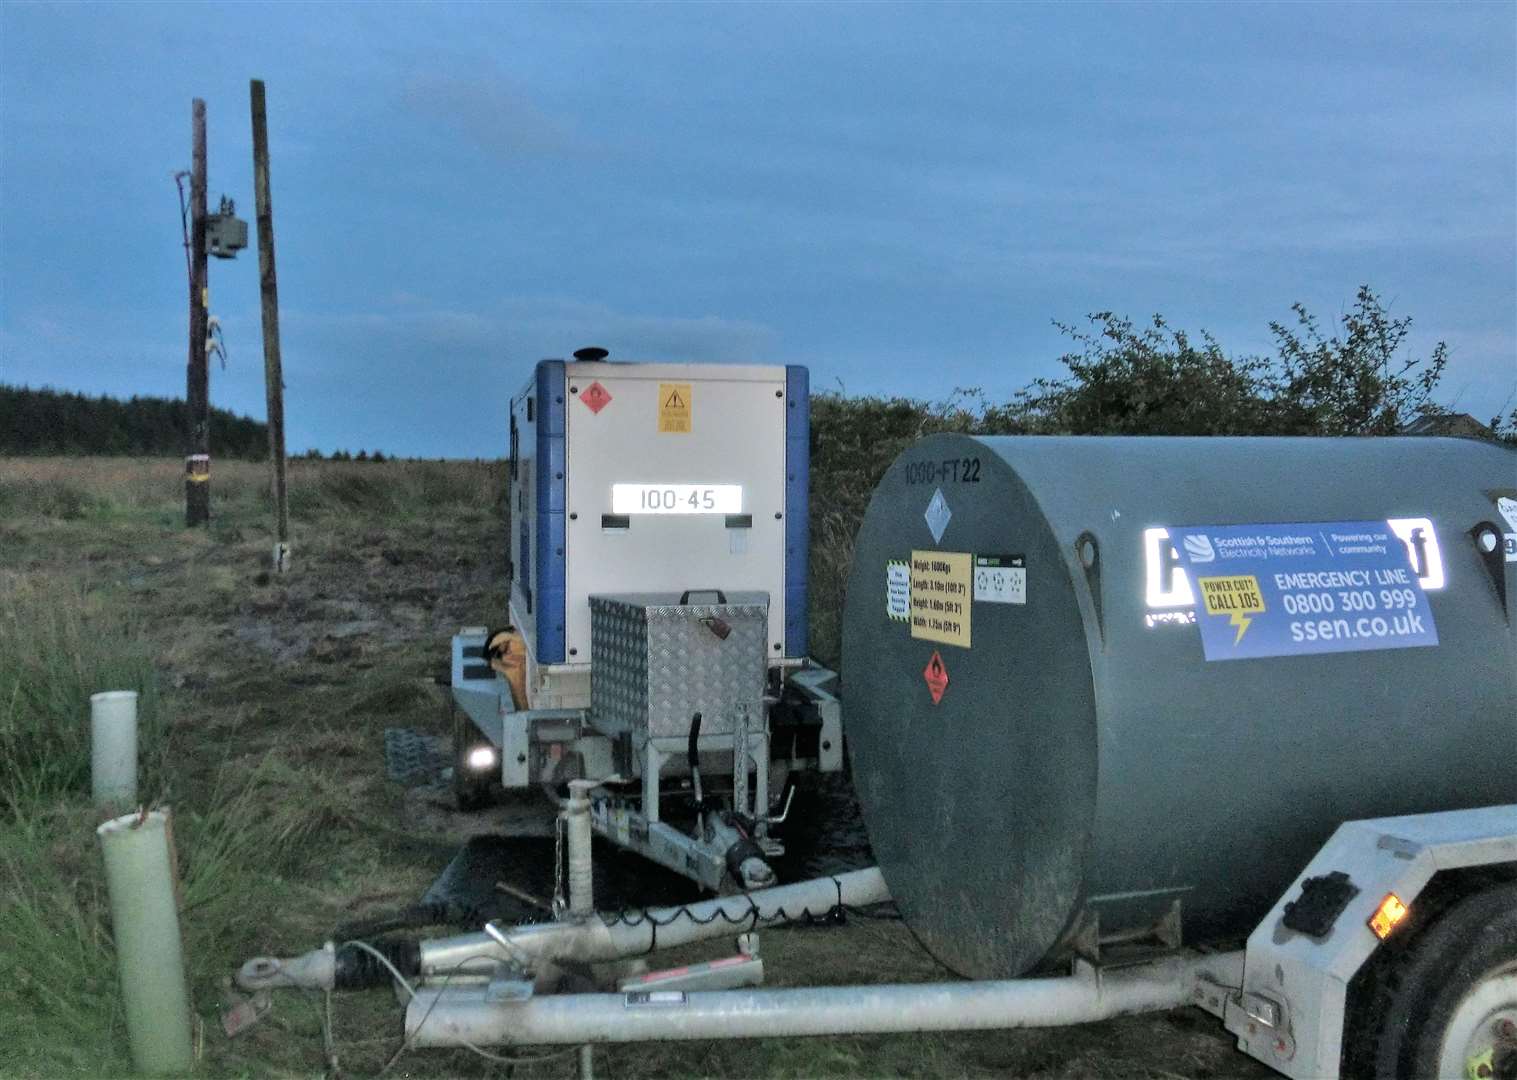 This generator is helping with potential power outages while the high voltage power system is upgraded. Picture: DGS